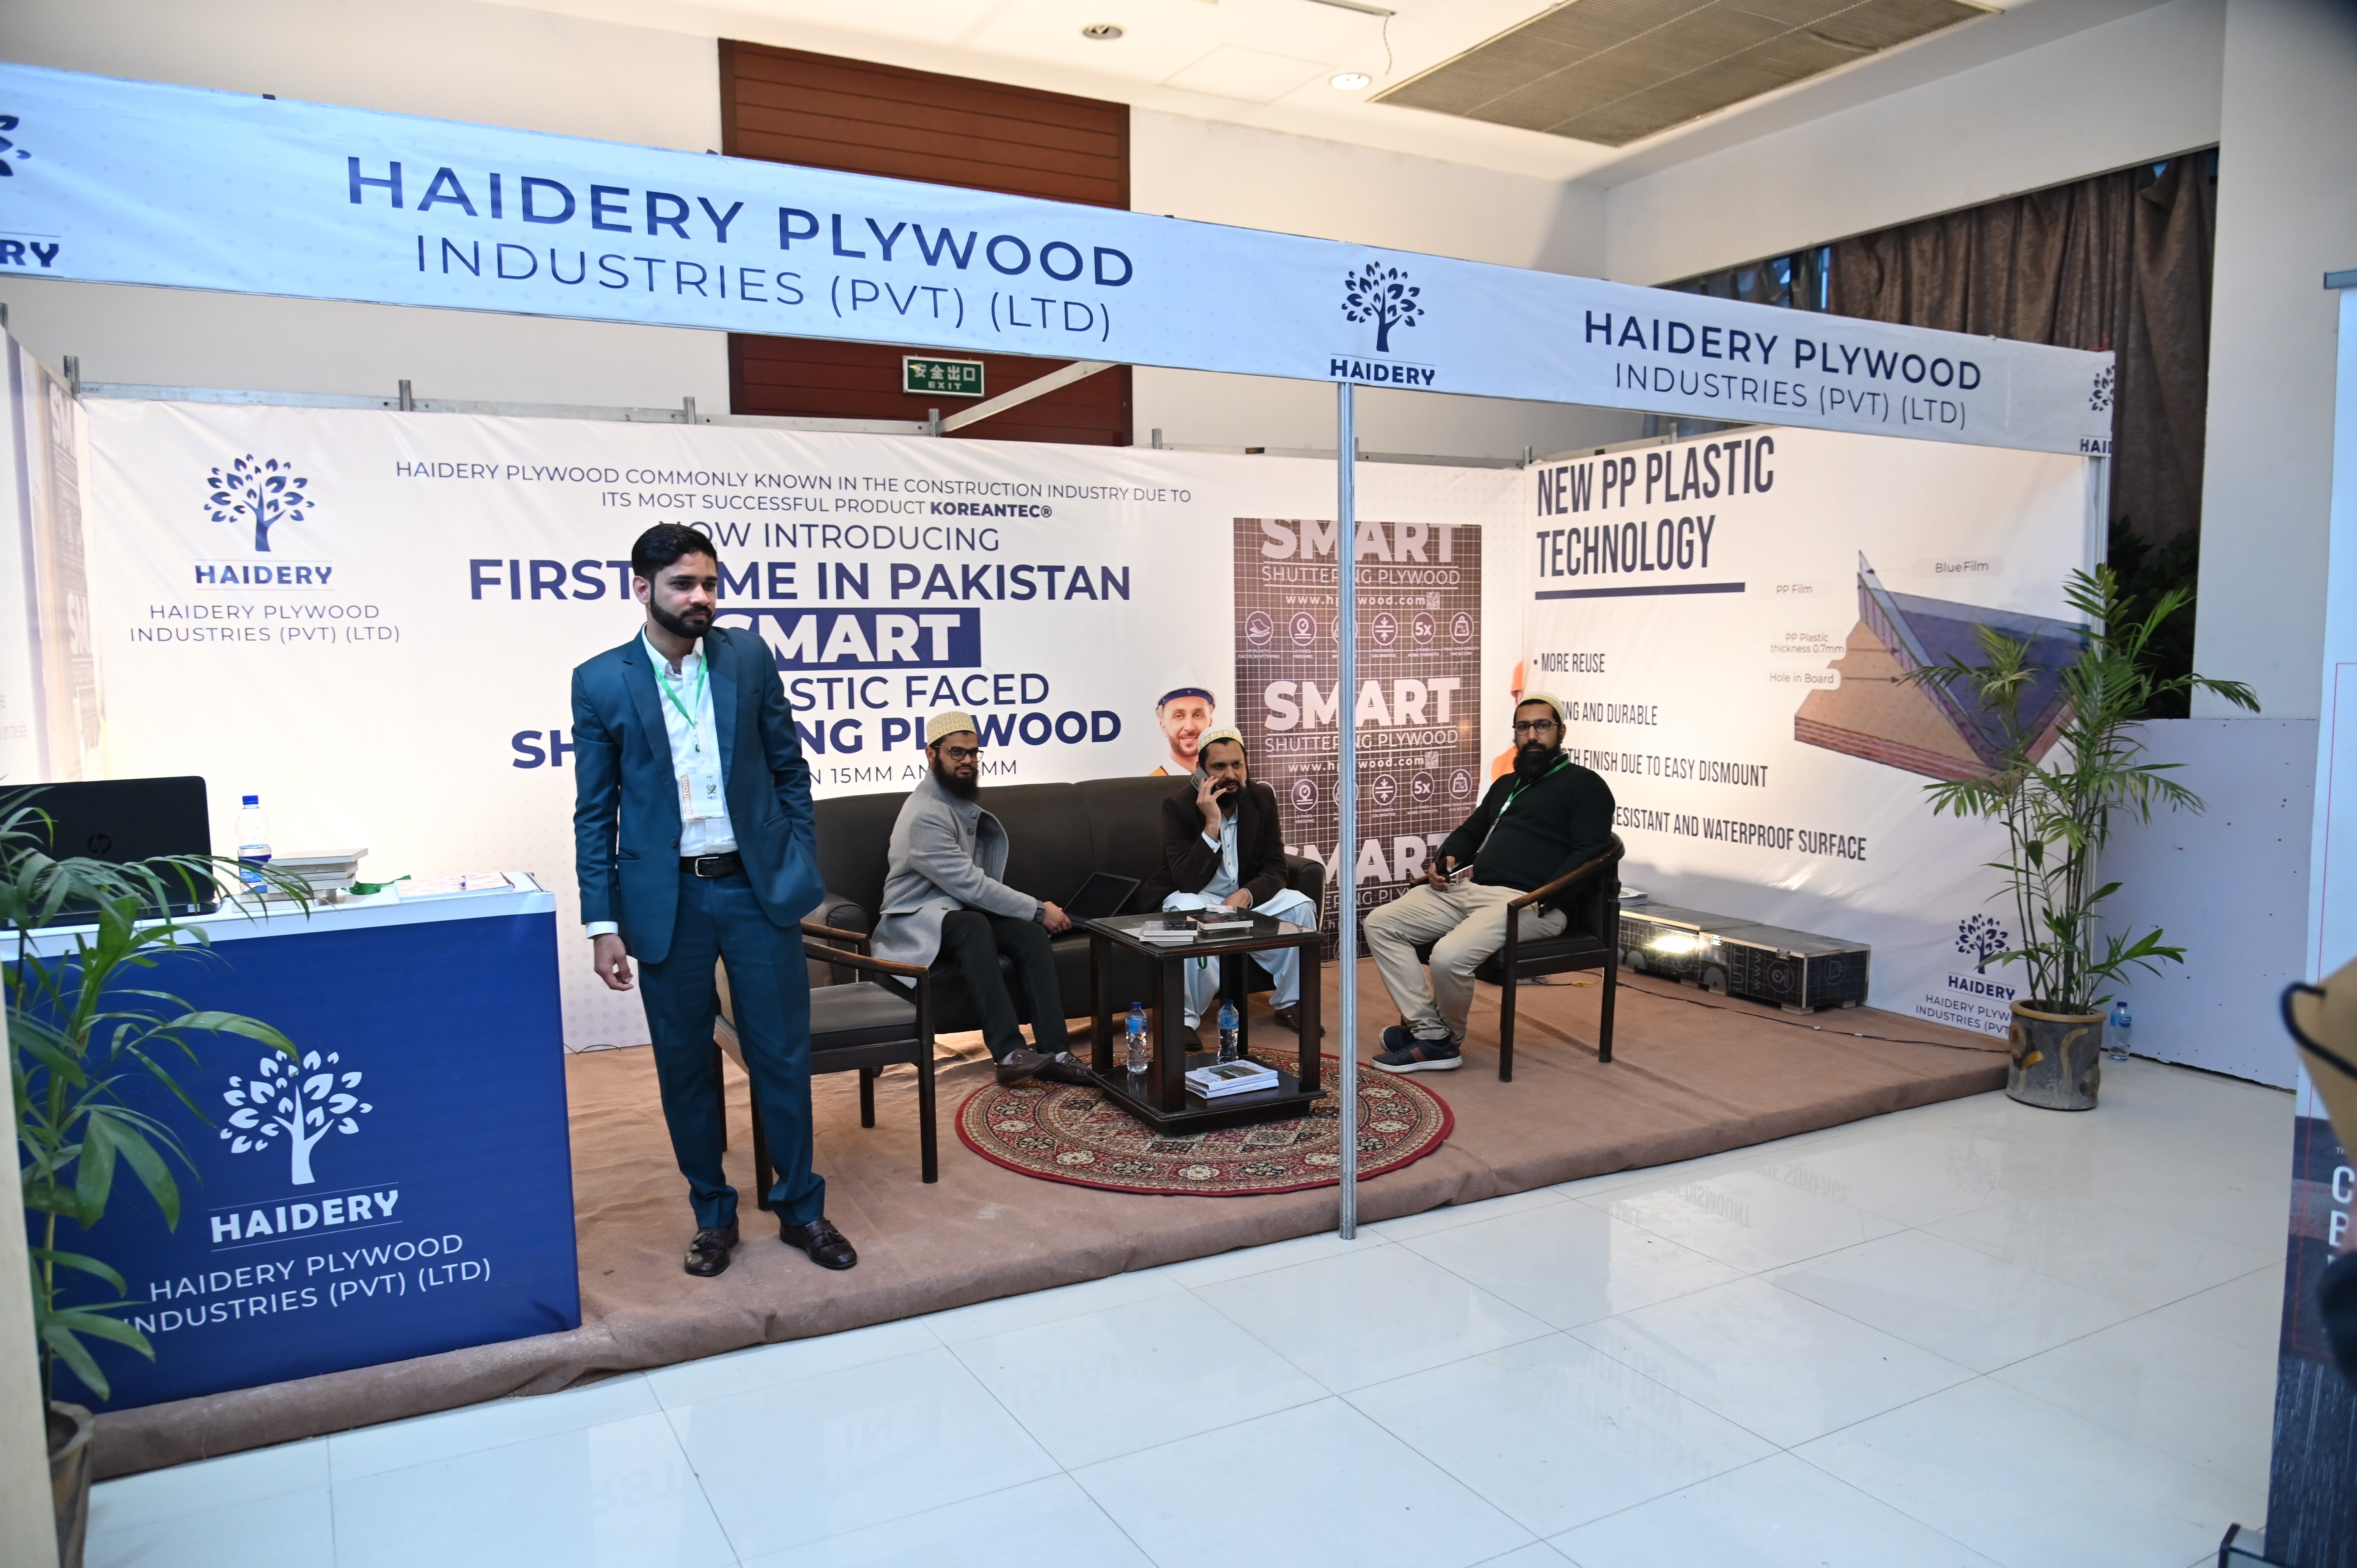 The exhibitors of Haidery plywood Industries (Pvt) Ltd